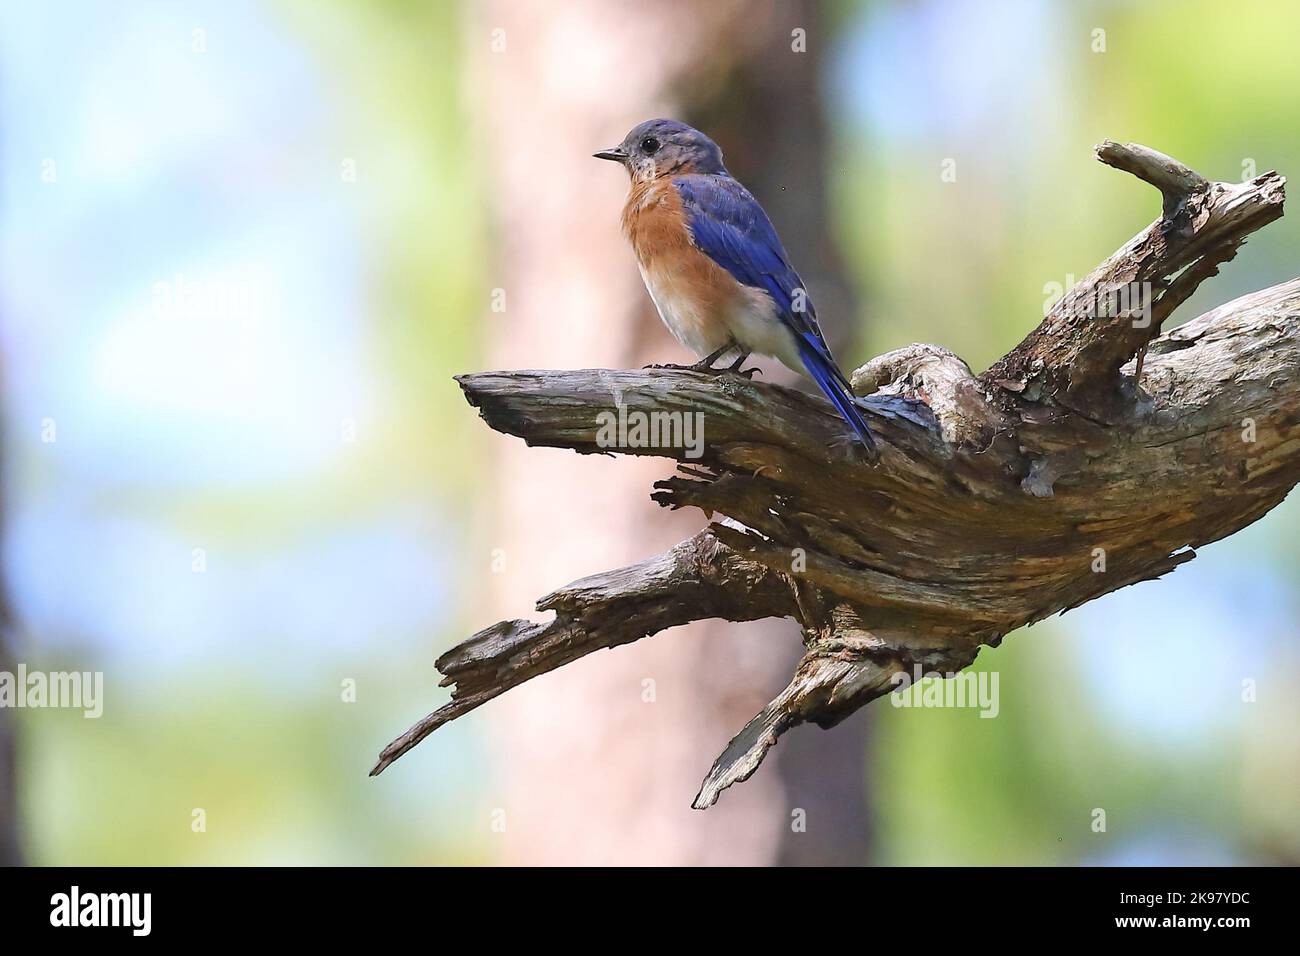 Eastern bluebird perched on a branch Stock Photo